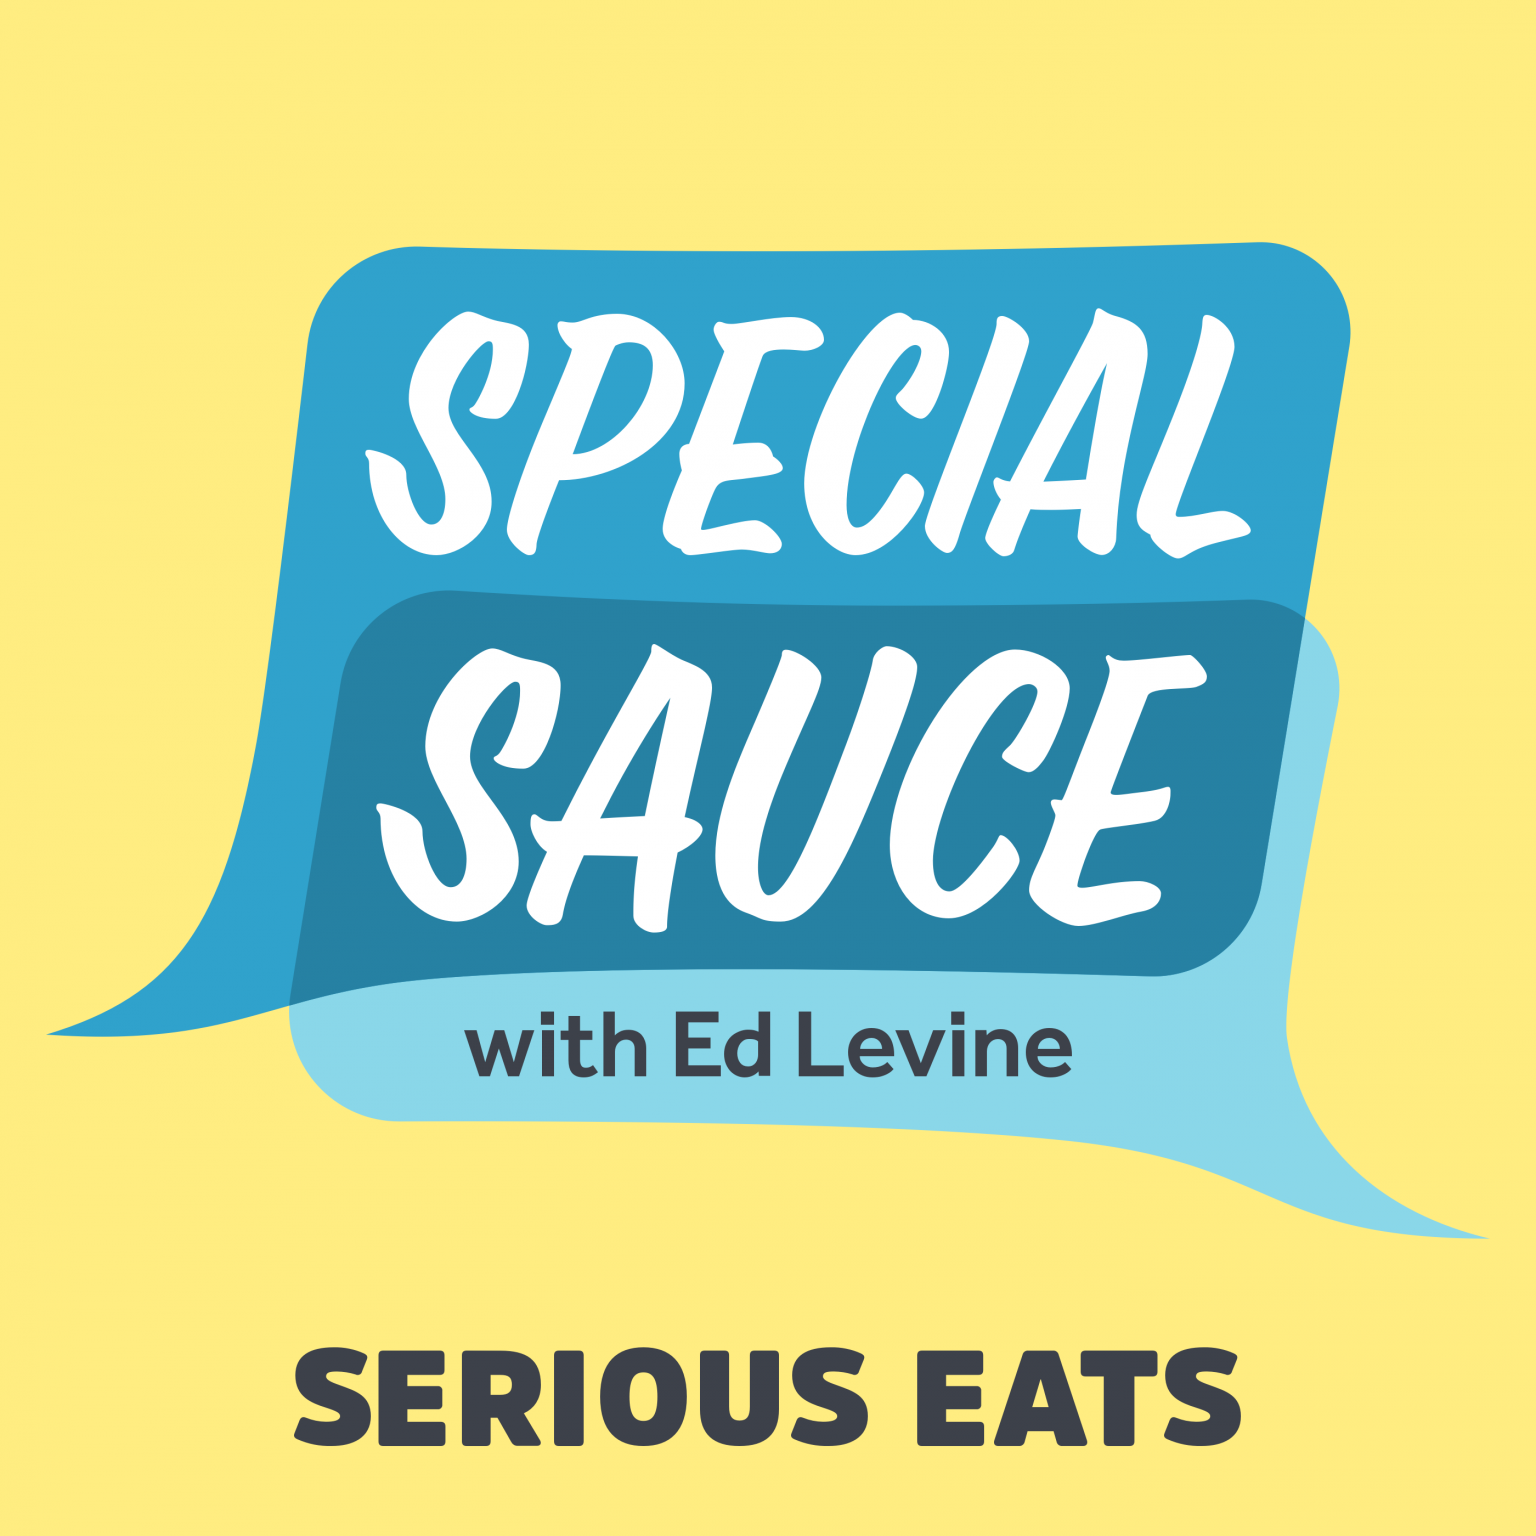 Special Sauce: “Is Deep Dish Pizza a Casserole?” And Other Pressing Pizza Questions [2/2]